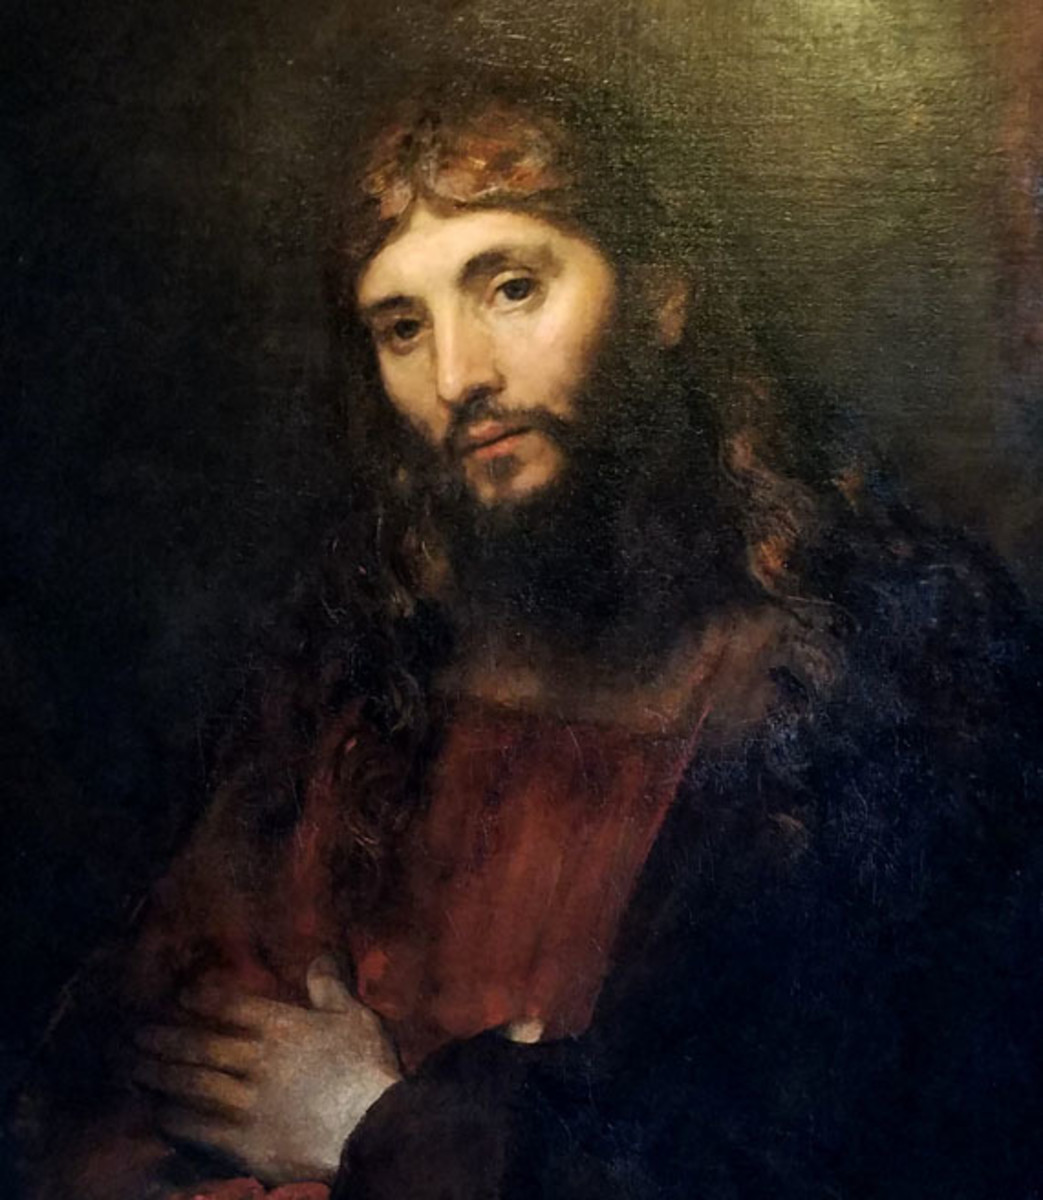 Painting of Jesus by Rembrandt